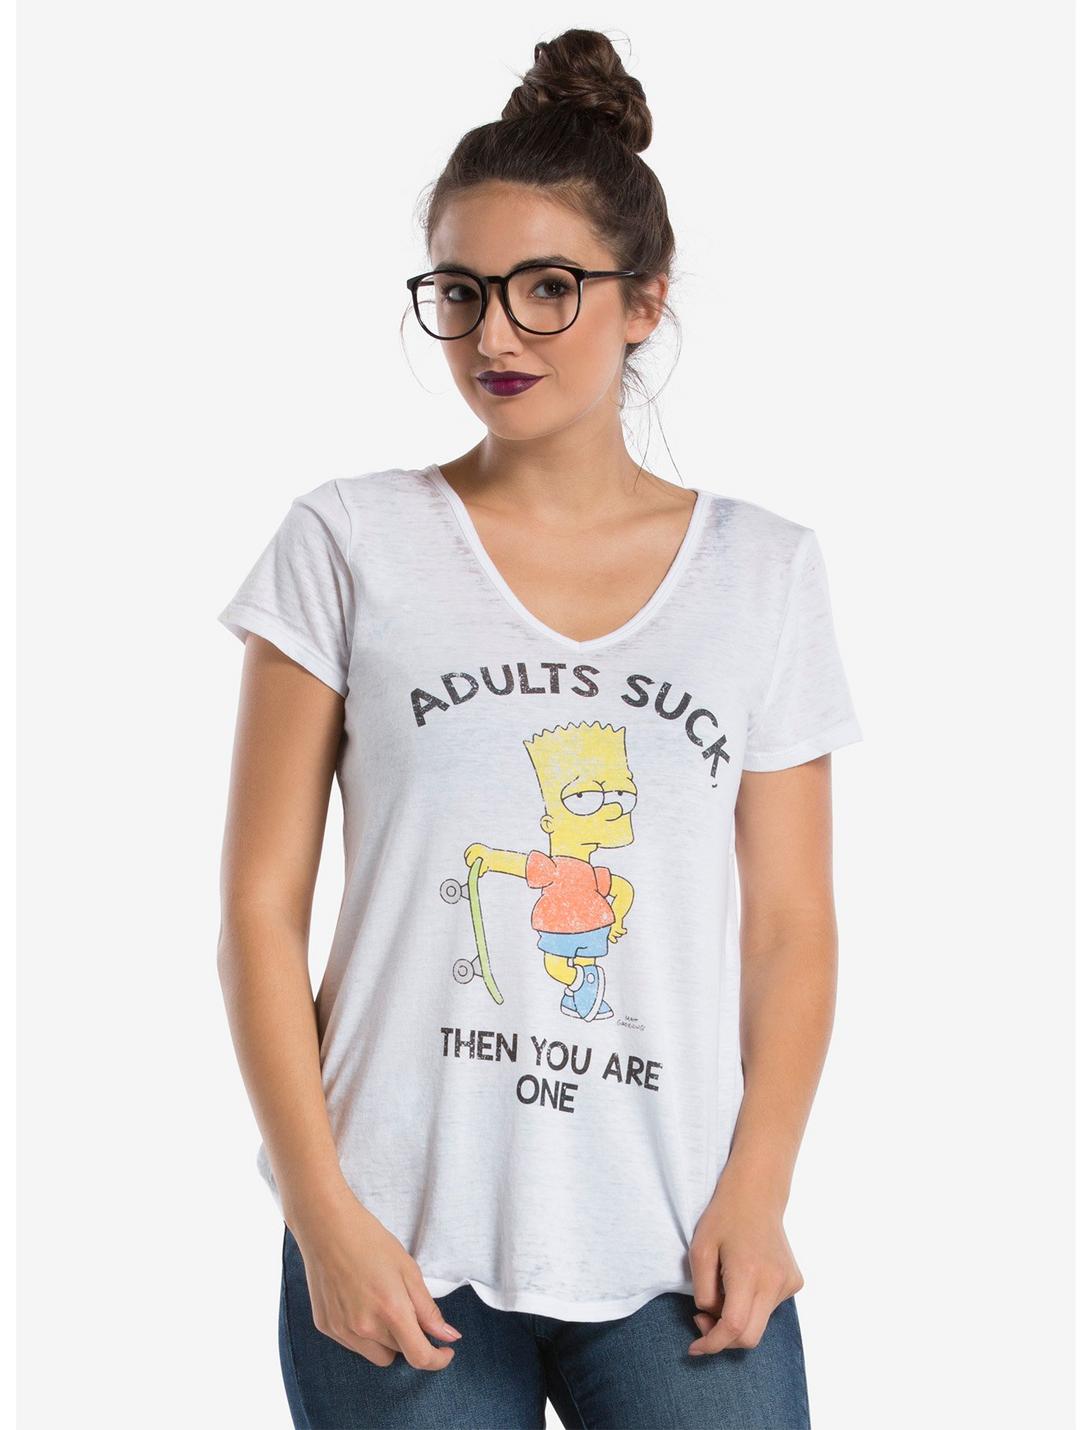 Recycled Karma The Simpsons Adults Suck Womens Tee, WHITE, hi-res